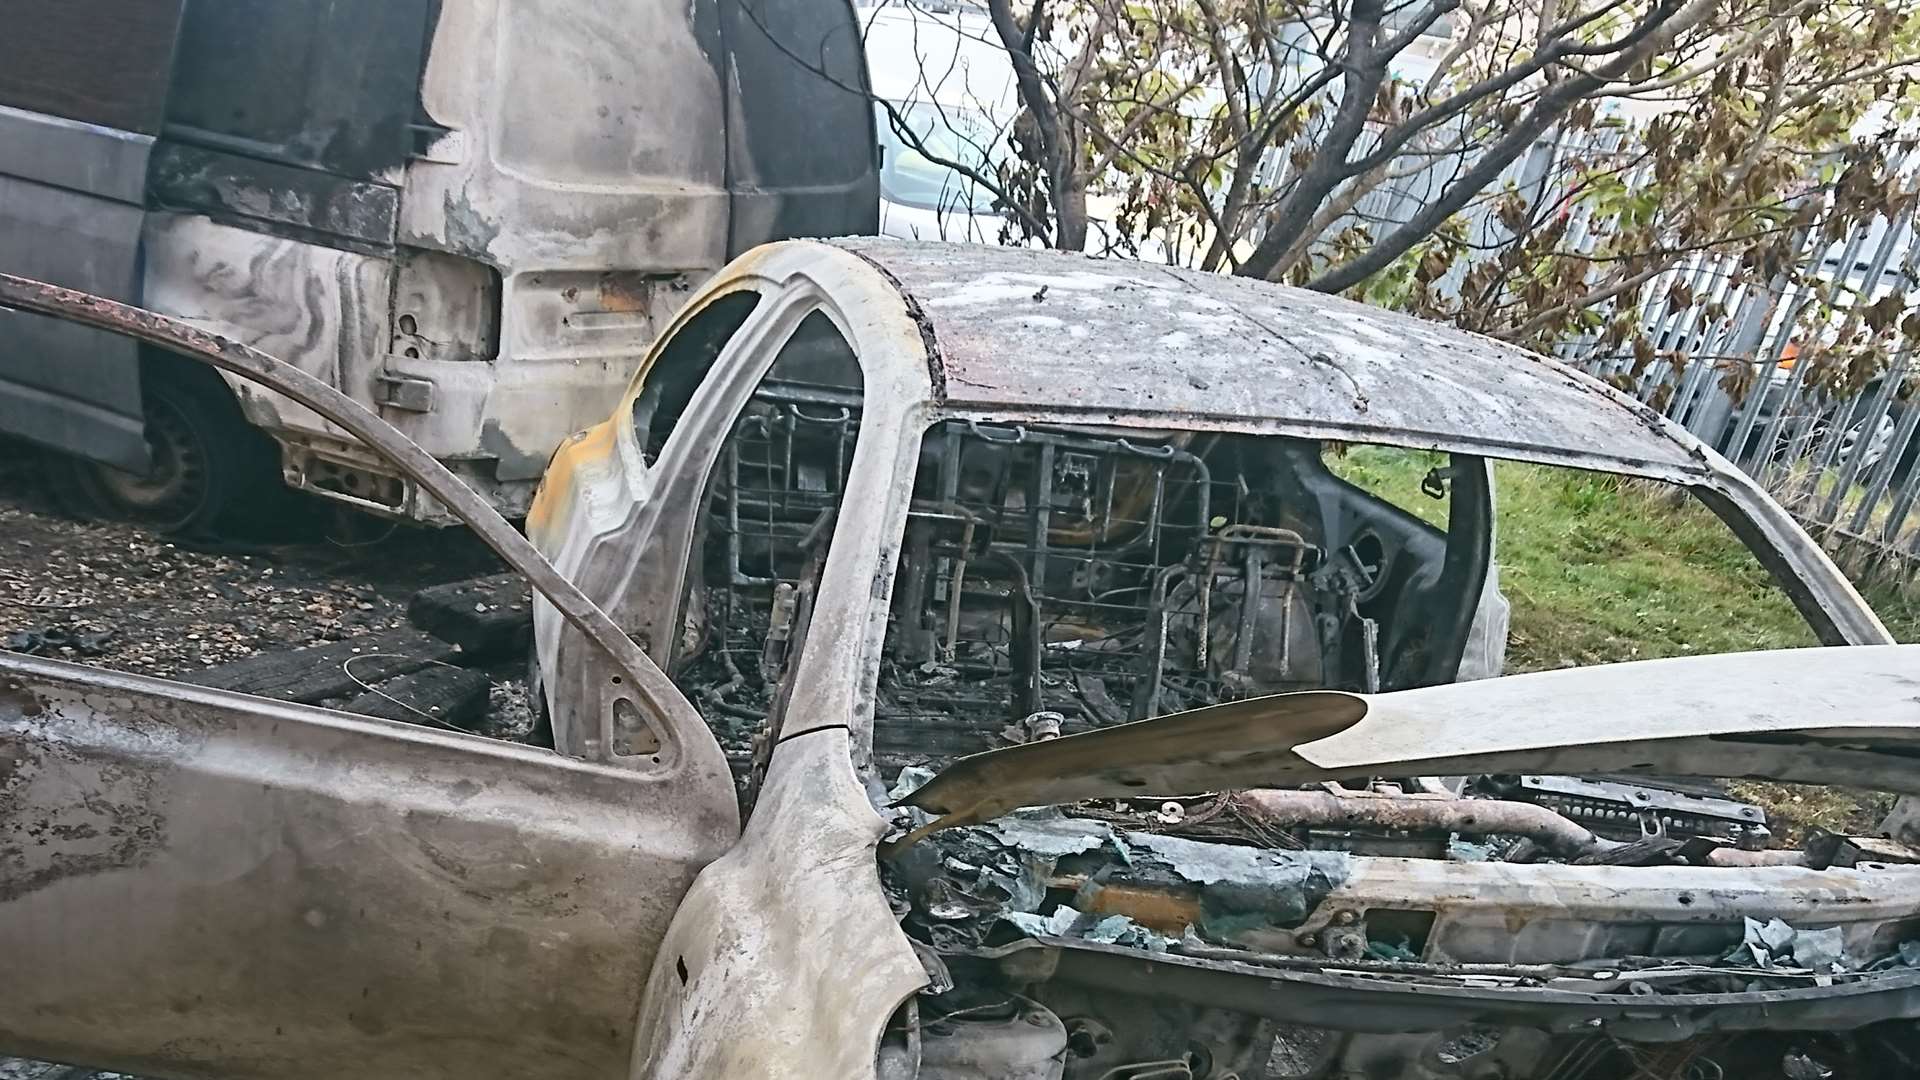 The burnt out Micra and the VW Transporter